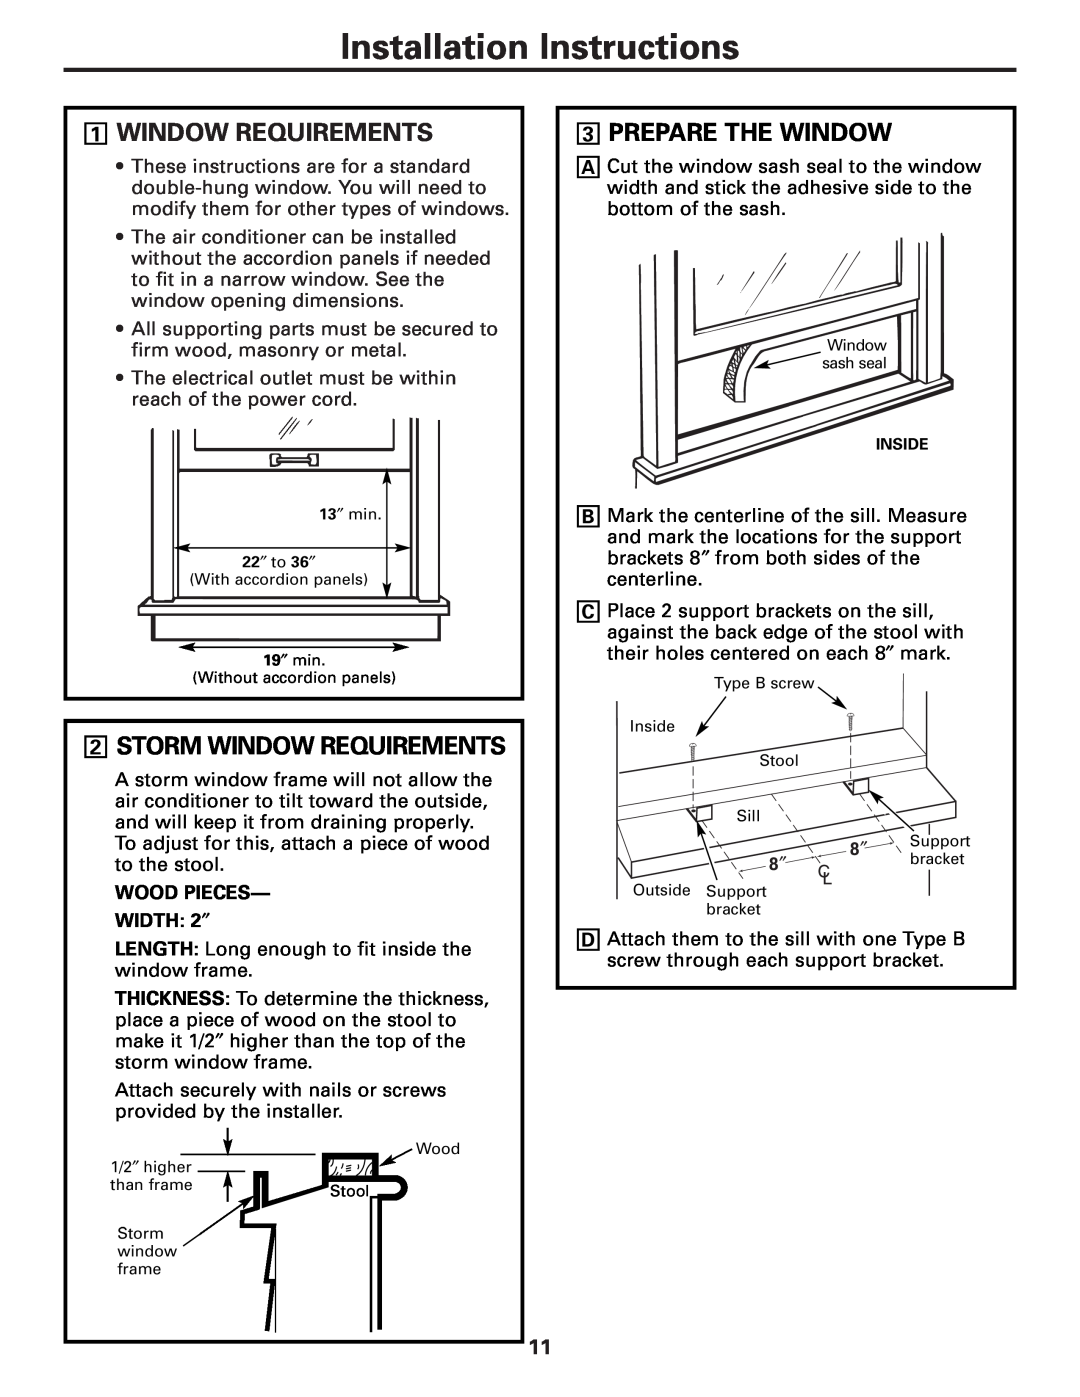 GE AGM05 owner manual 1WINDOW REQUIREMENTS, 2STORM WINDOW REQUIREMENTS, 3PREPARE THE WINDOW, Installation Instructions 